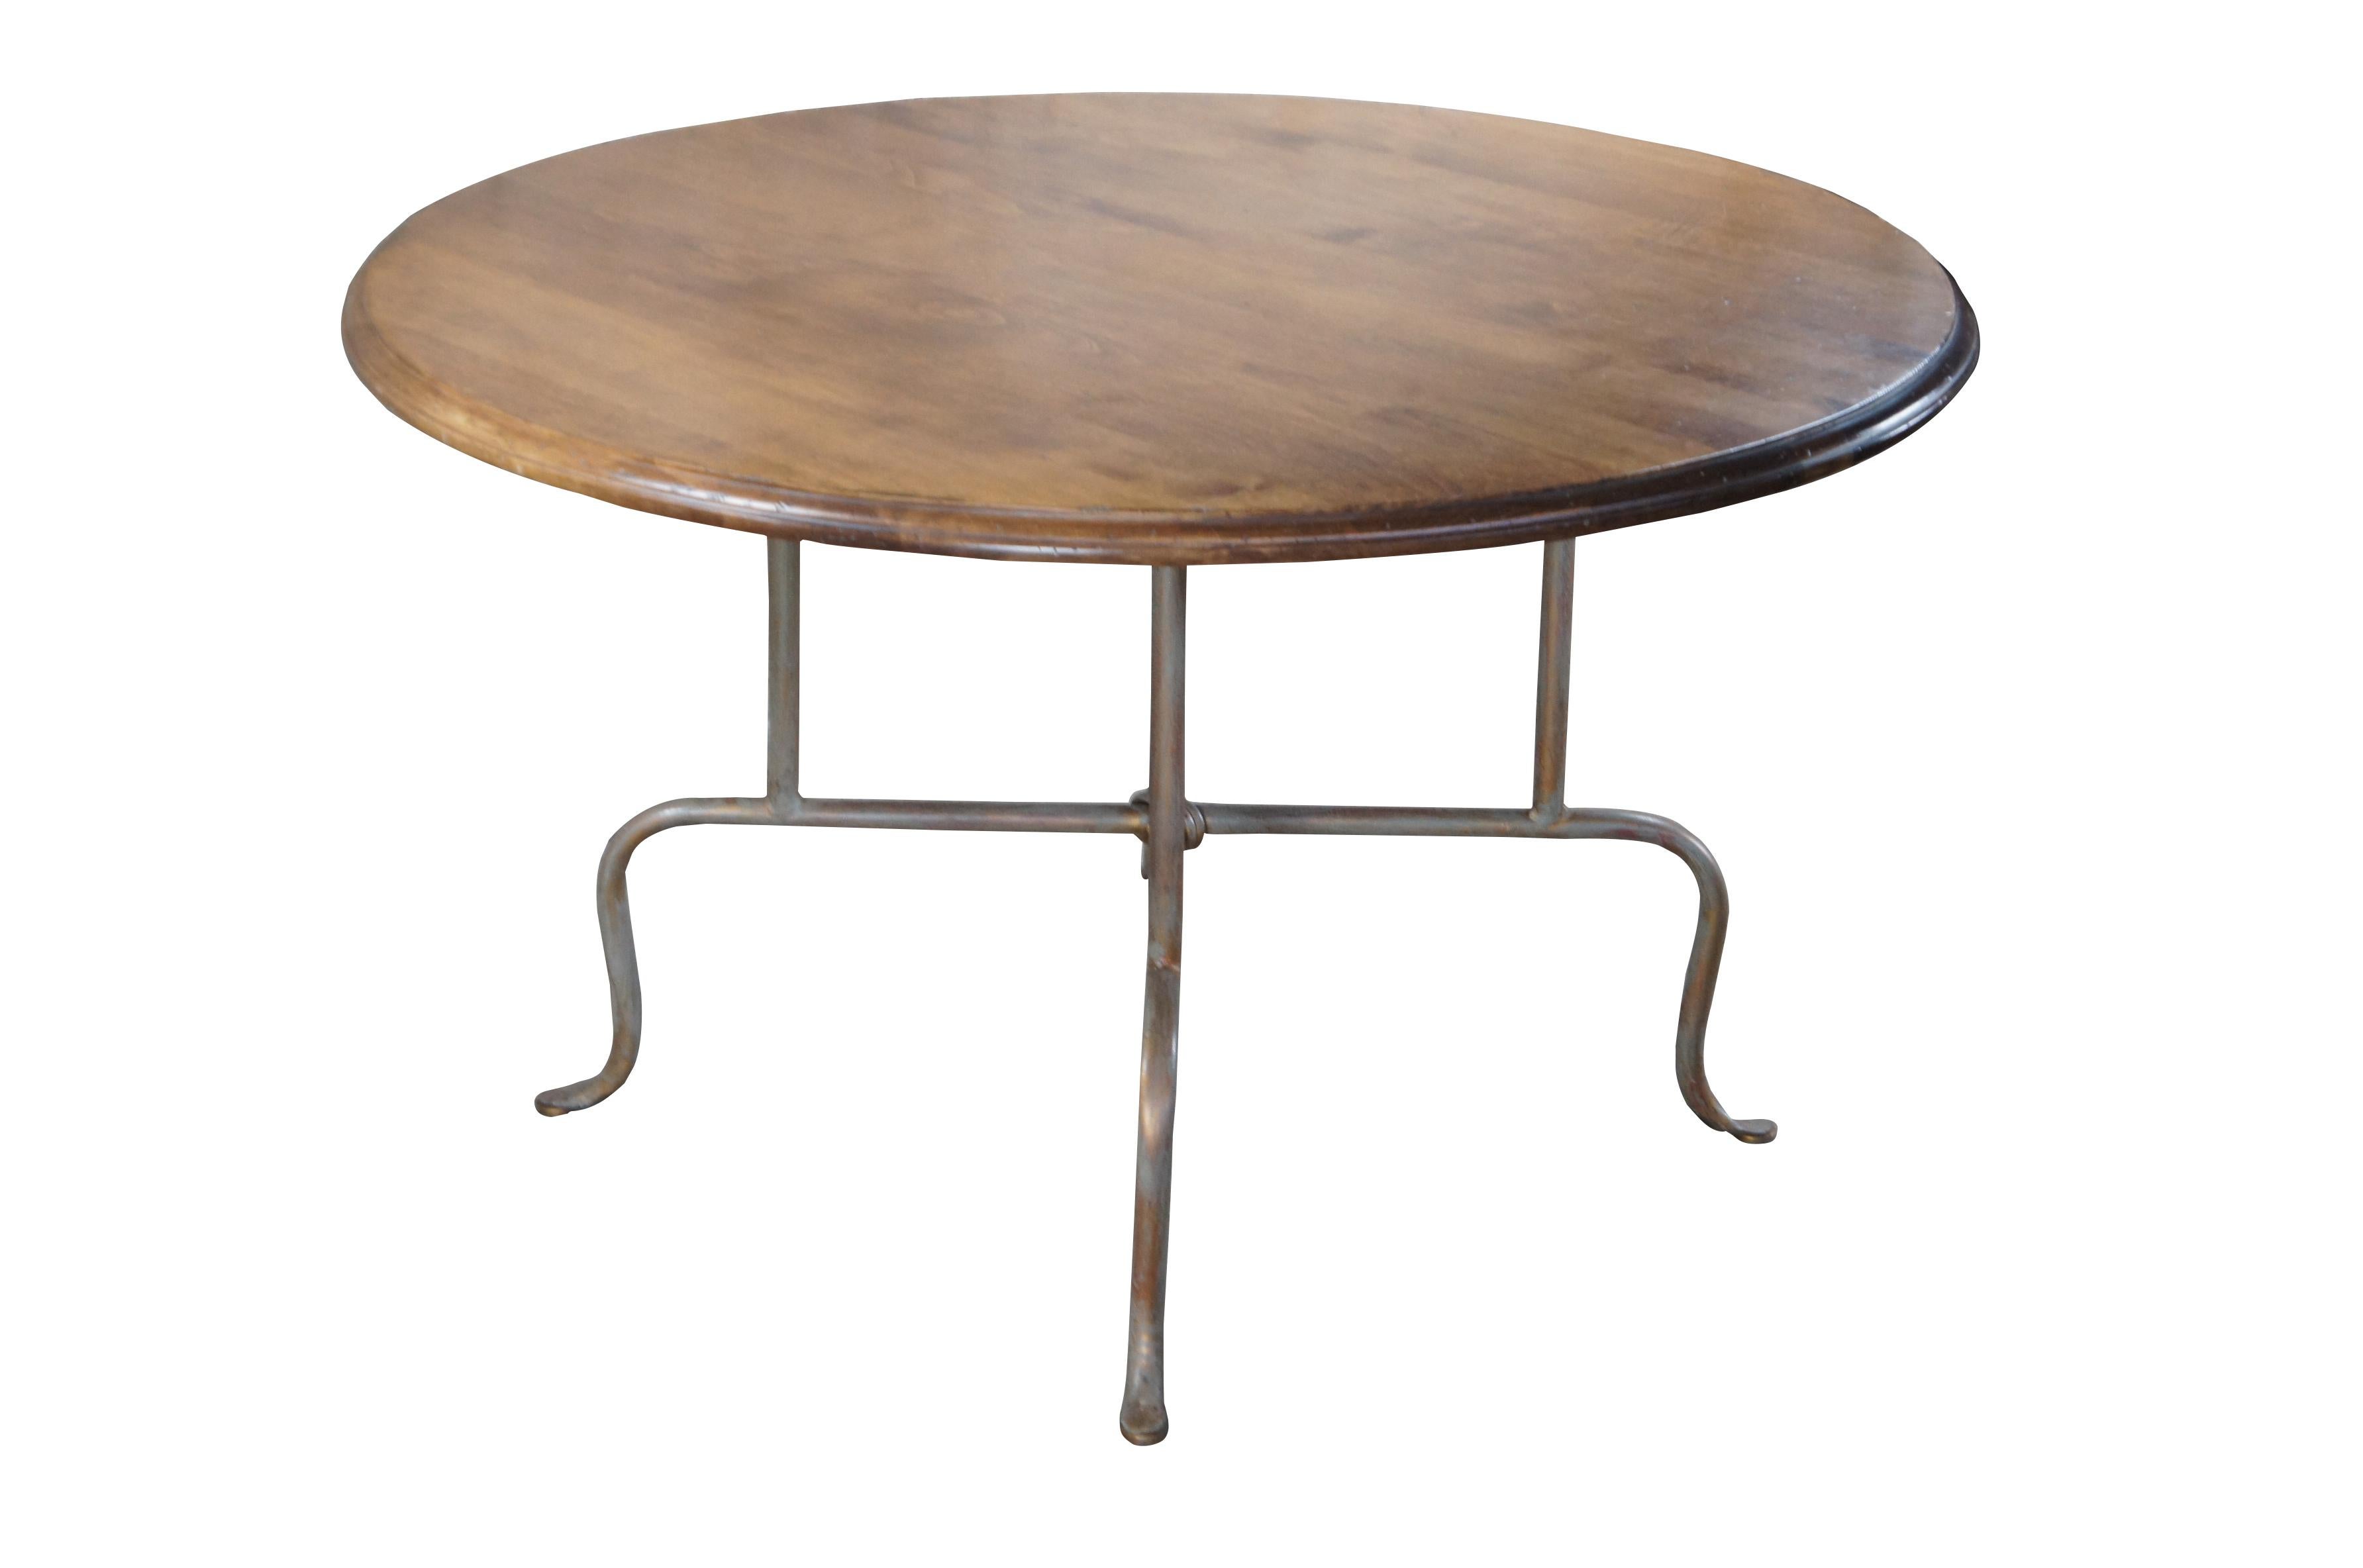 Late 20th century French inspired bistro, dining or breakfast table.  Features a round birch top over iron birdcage style base connected by an X stretcher over cabriole legs.

Dimensions: 
48